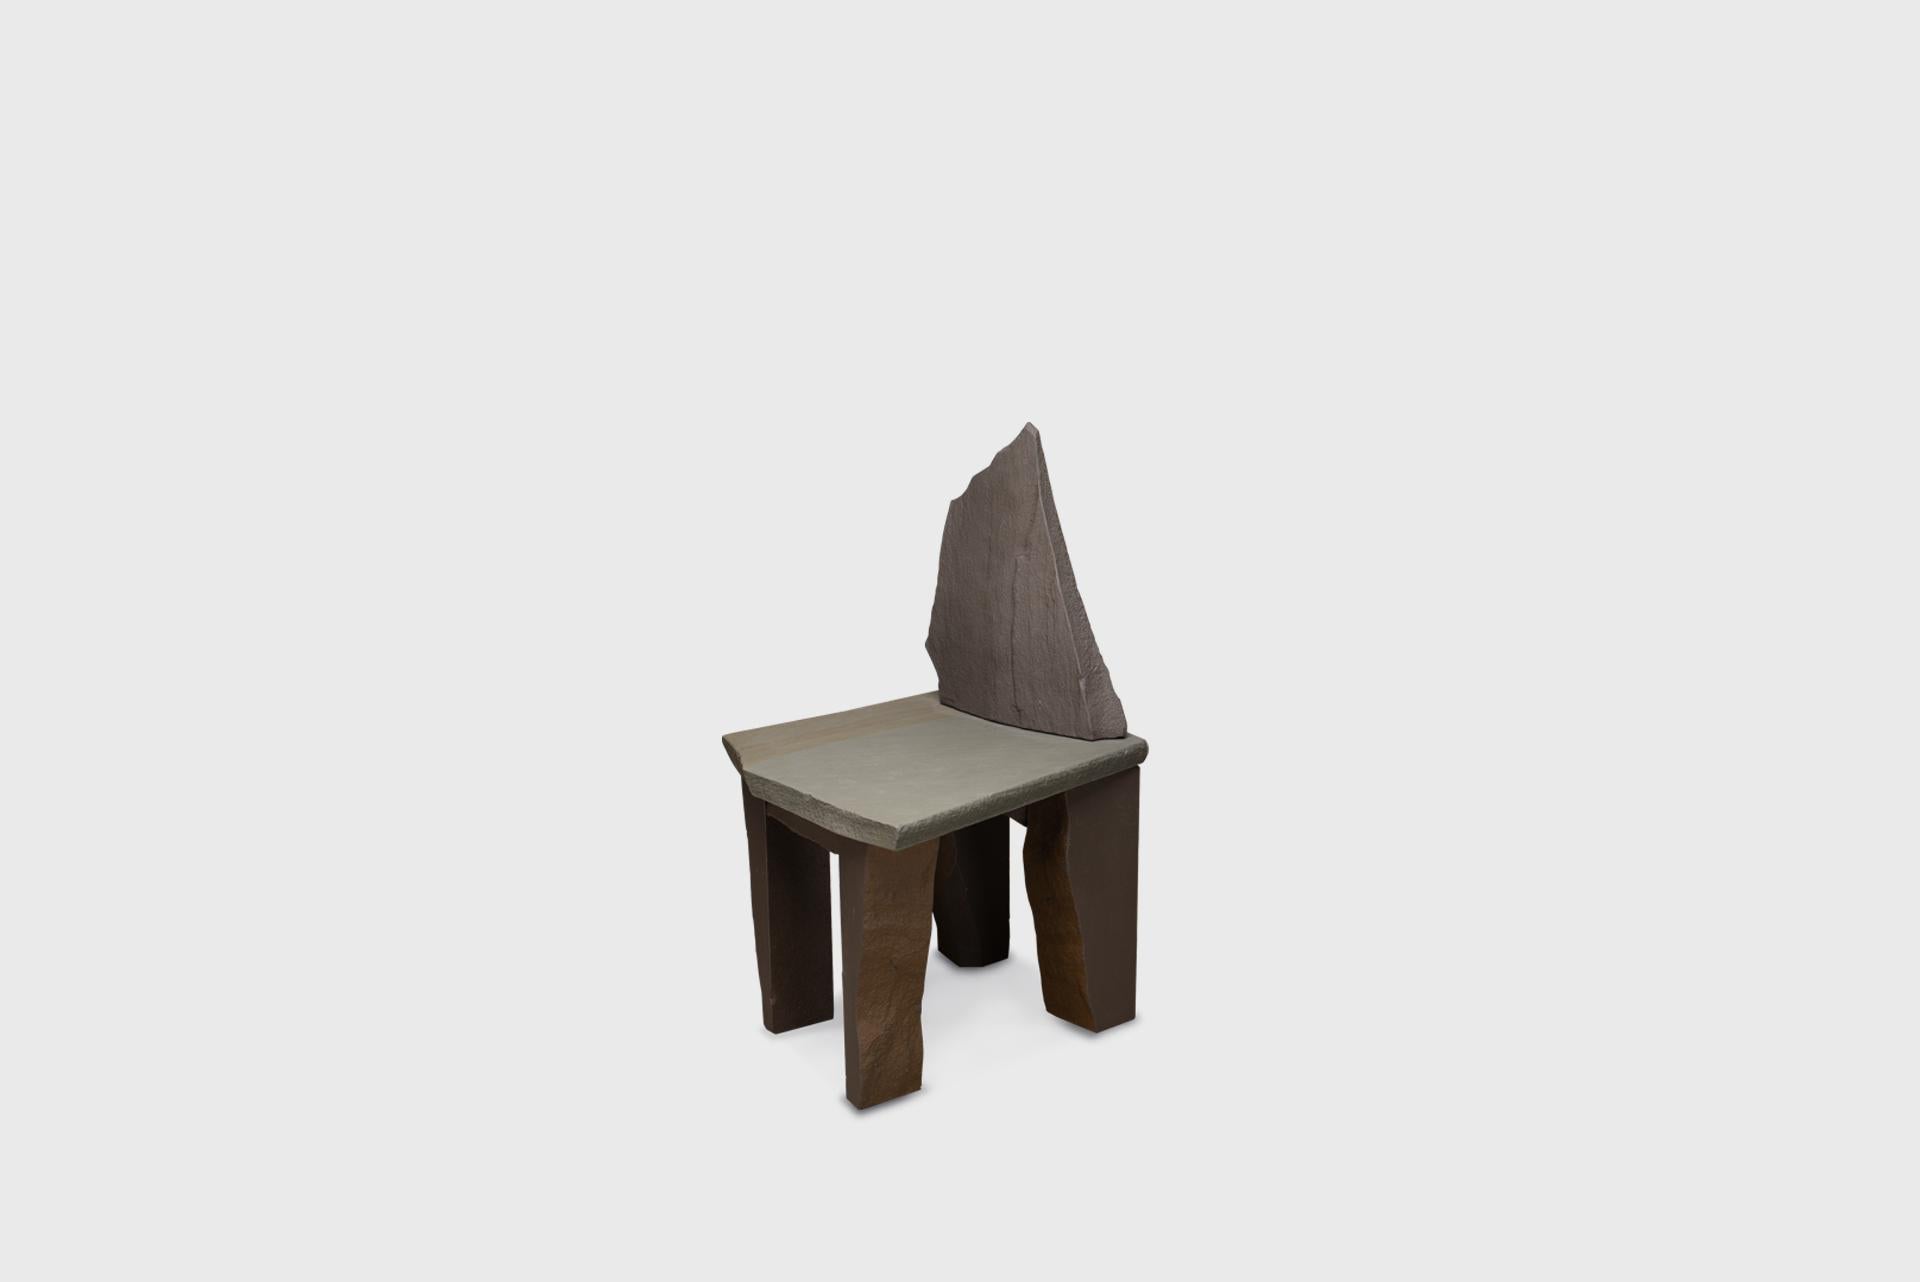 Contemporary Natural Chair 16, Graywacke Offcut Gray Stone, Carsten in der Elst For Sale 4